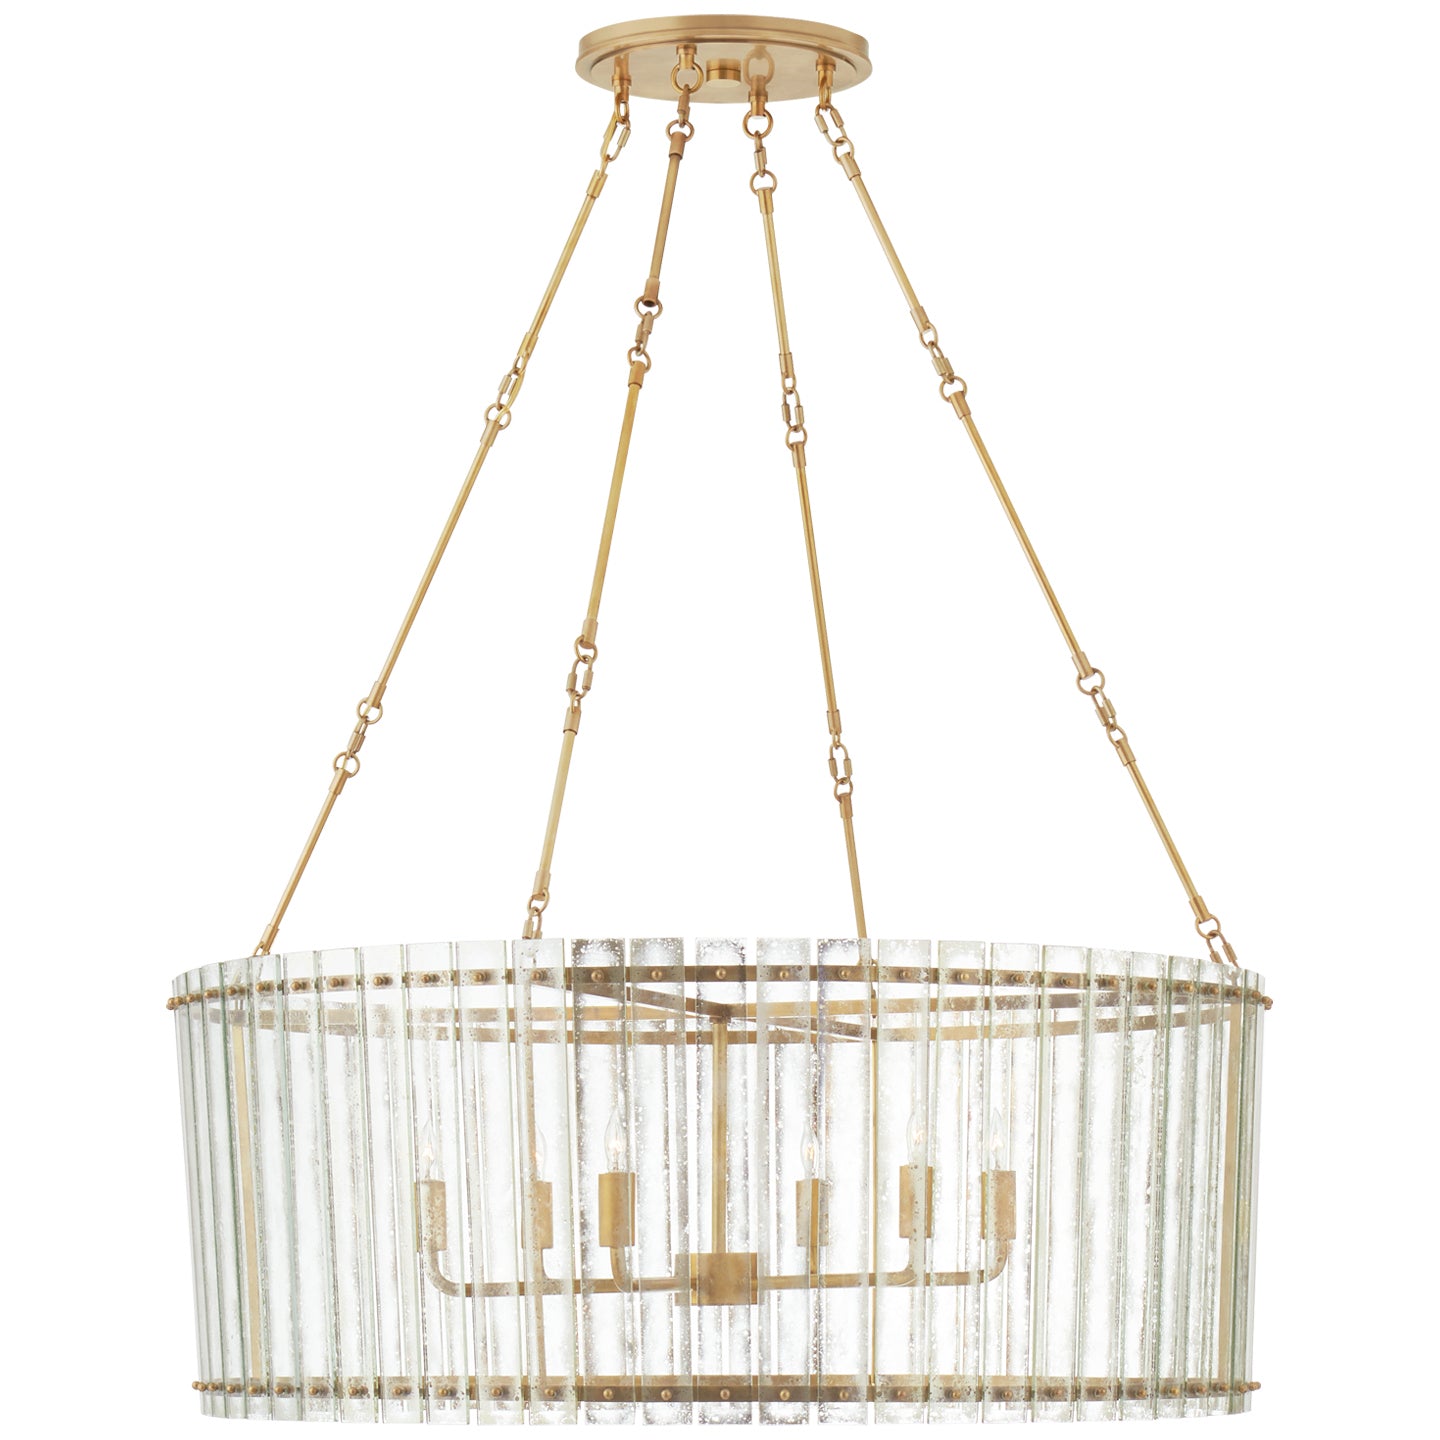 Visual Comfort Signature - S 5670HAB-AM - Six Light Chandelier - Cadence - Hand-Rubbed Antique Brass